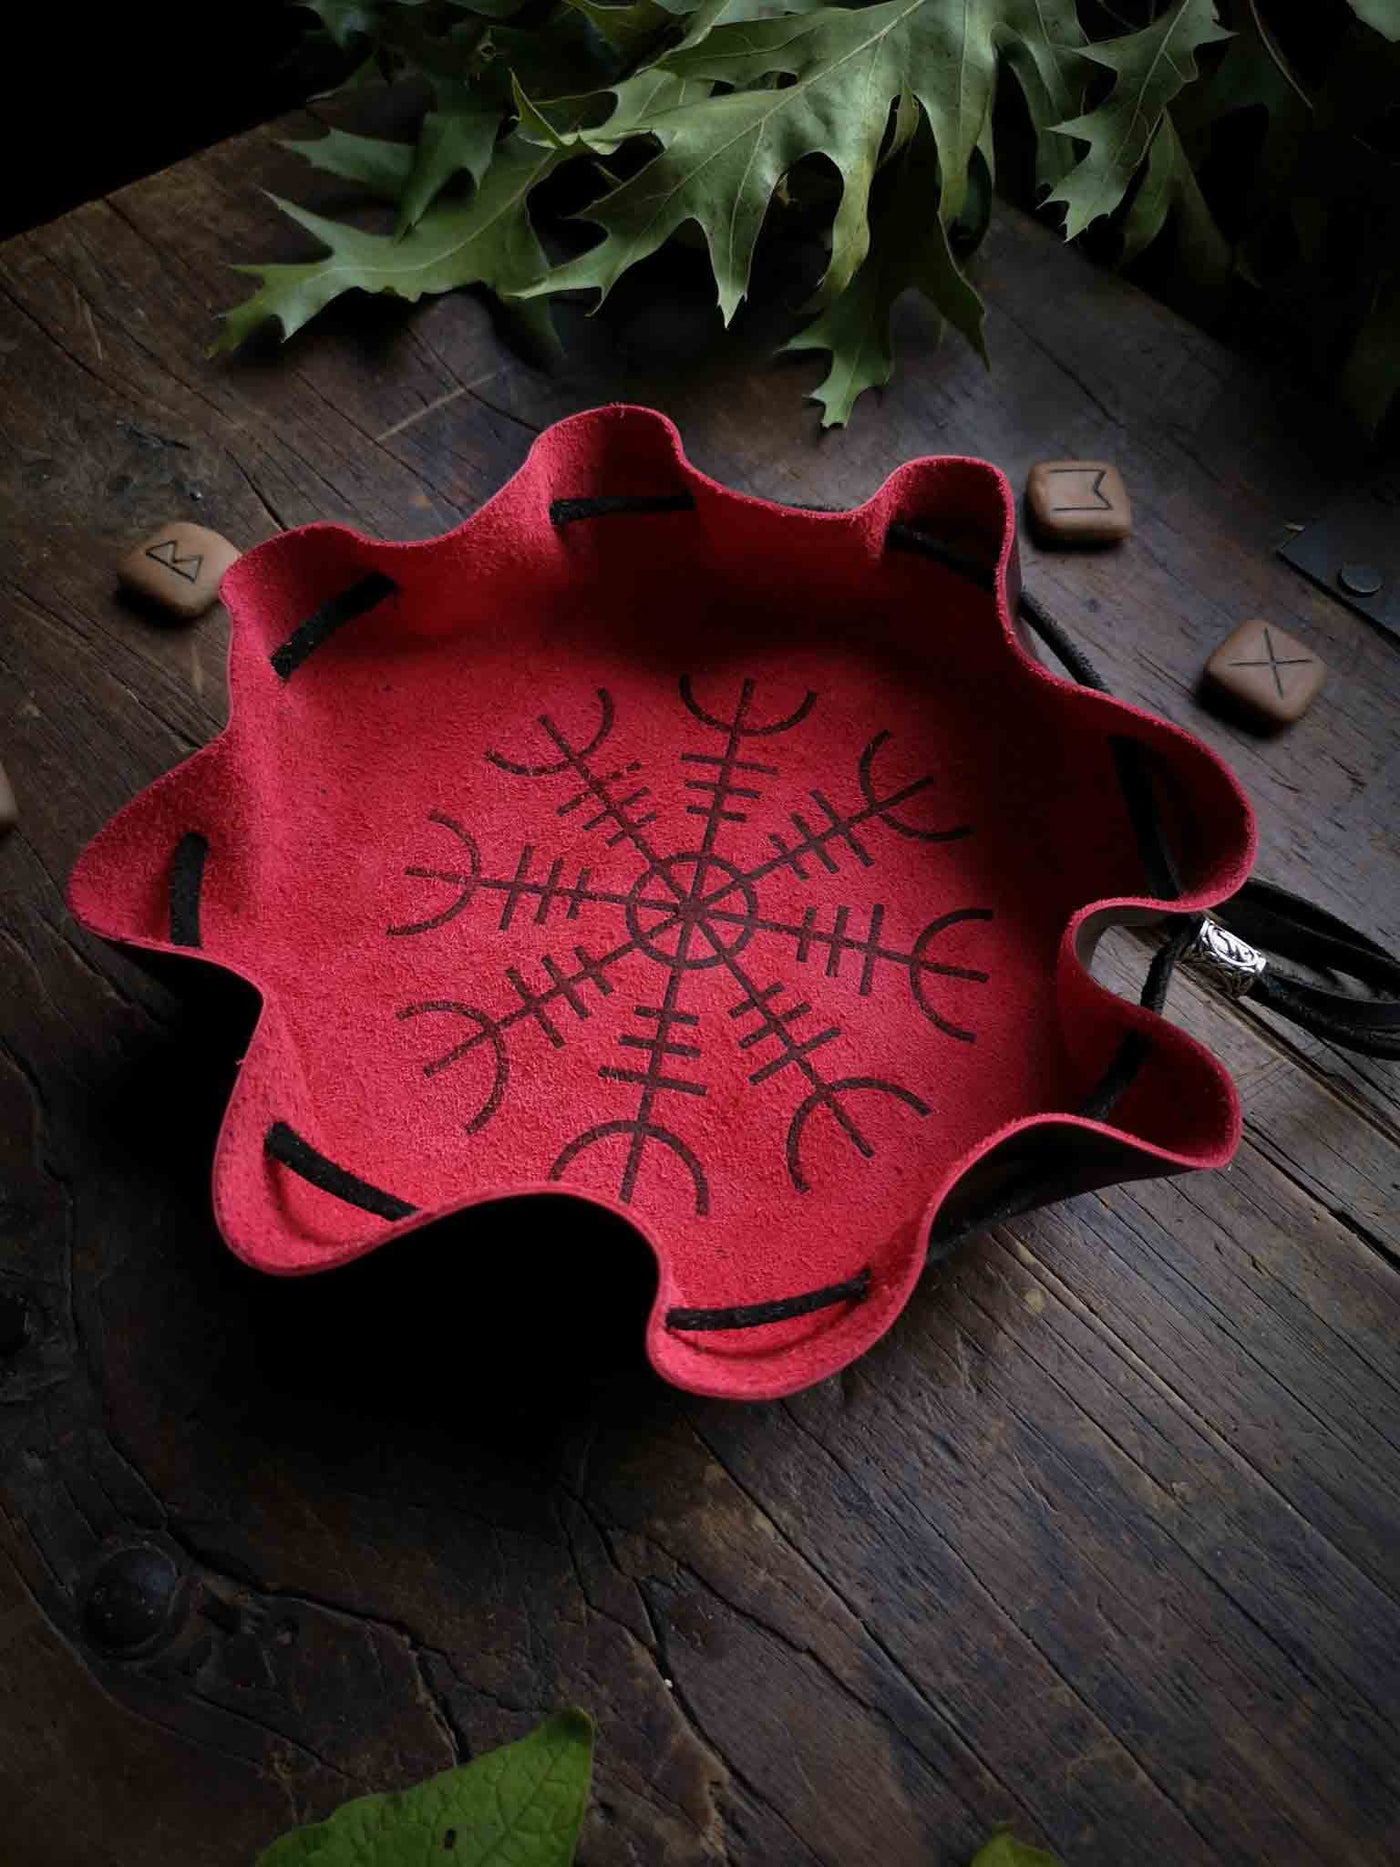 Fire - Rune Casting Leather Pouch Seconds Sale